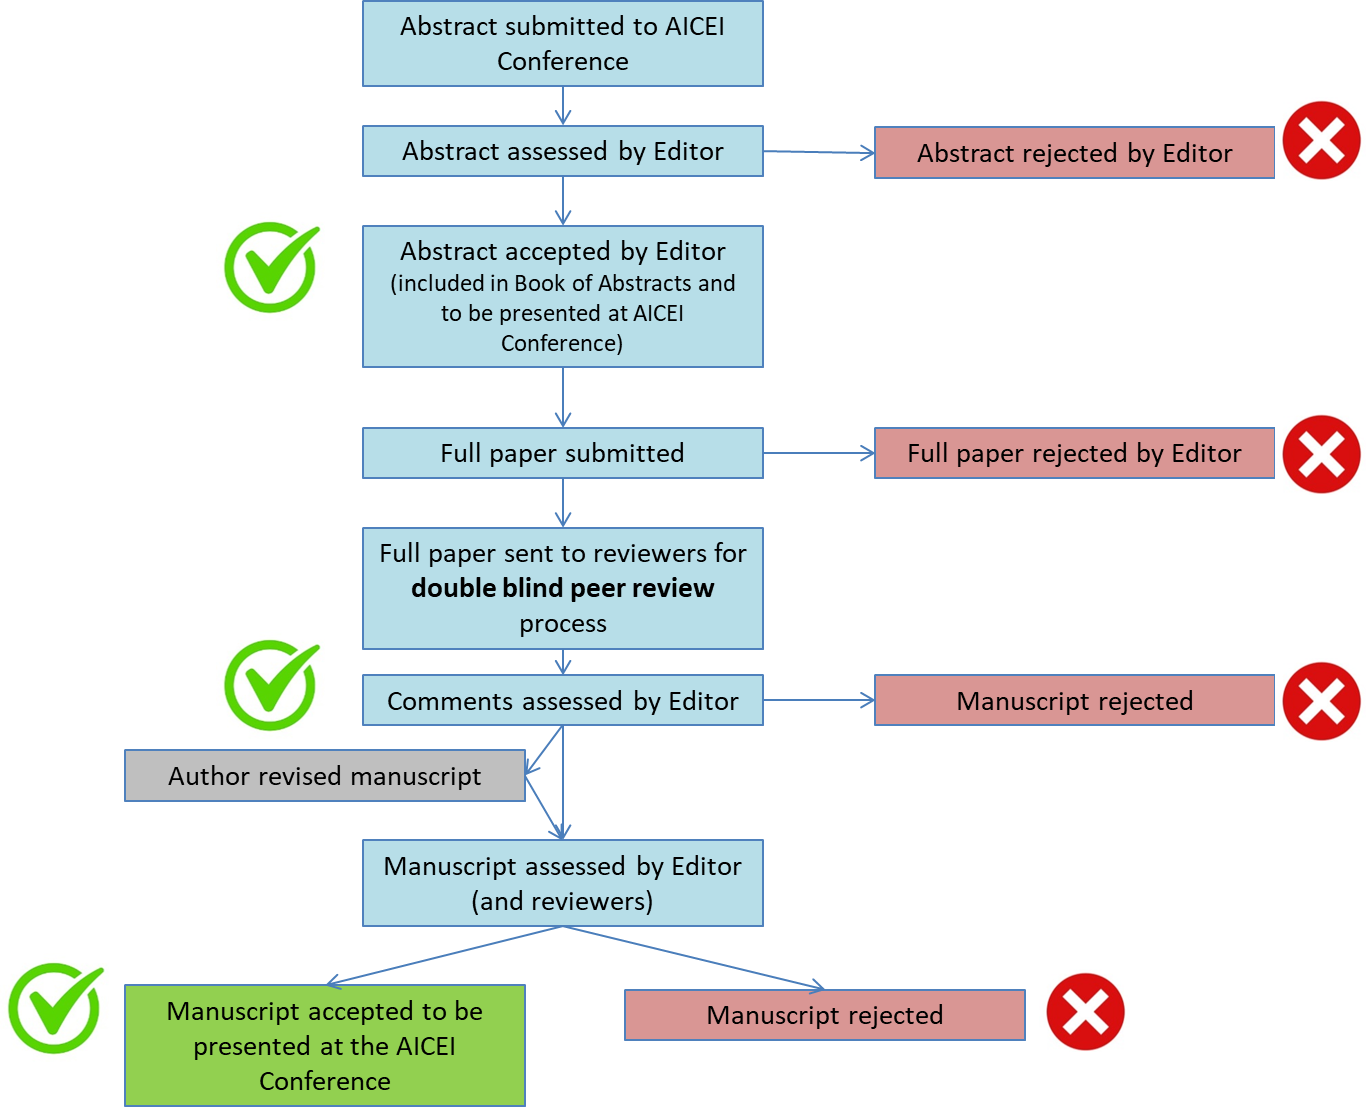 Illustration of AICEI Conference and AICEI Proceedings Double Blind Peer Review Process